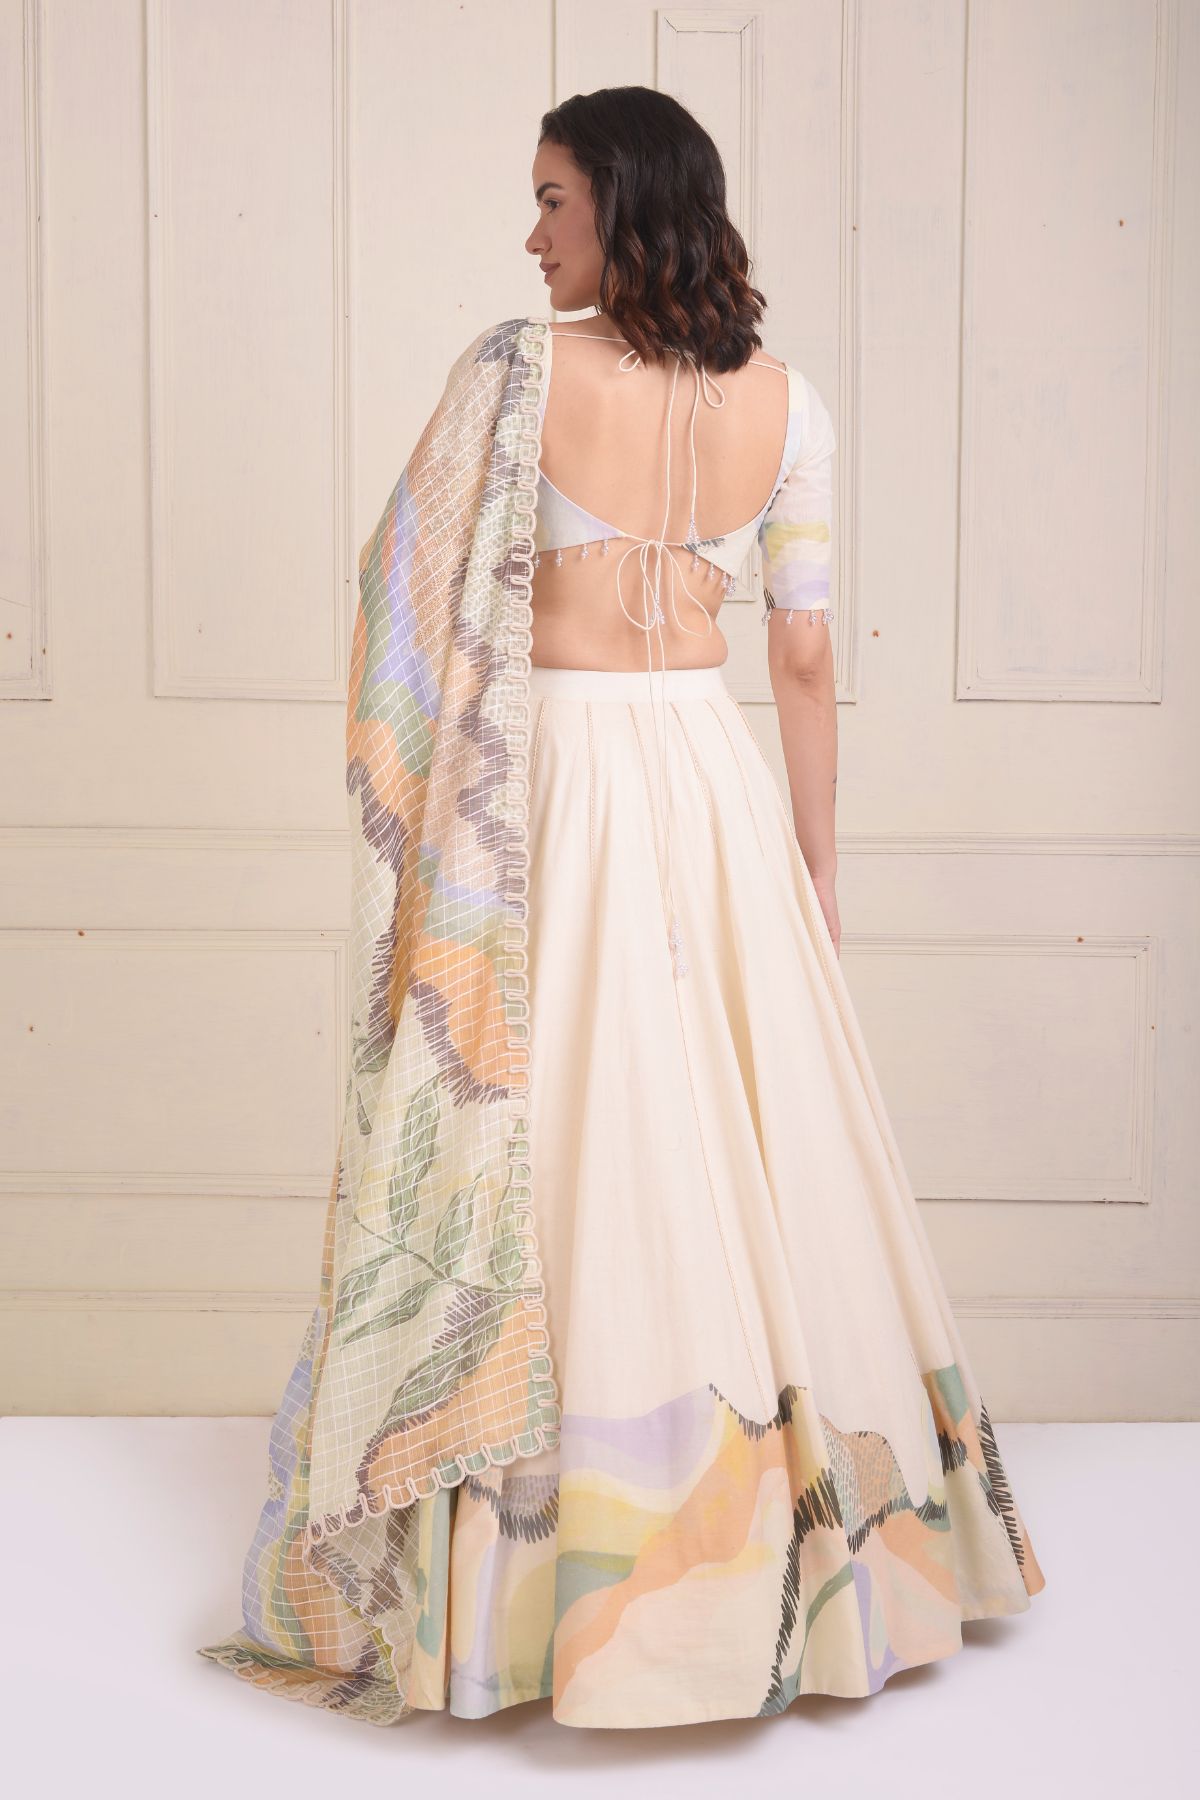 Placement patch printed lehenga with a printed scalloped neck blouse